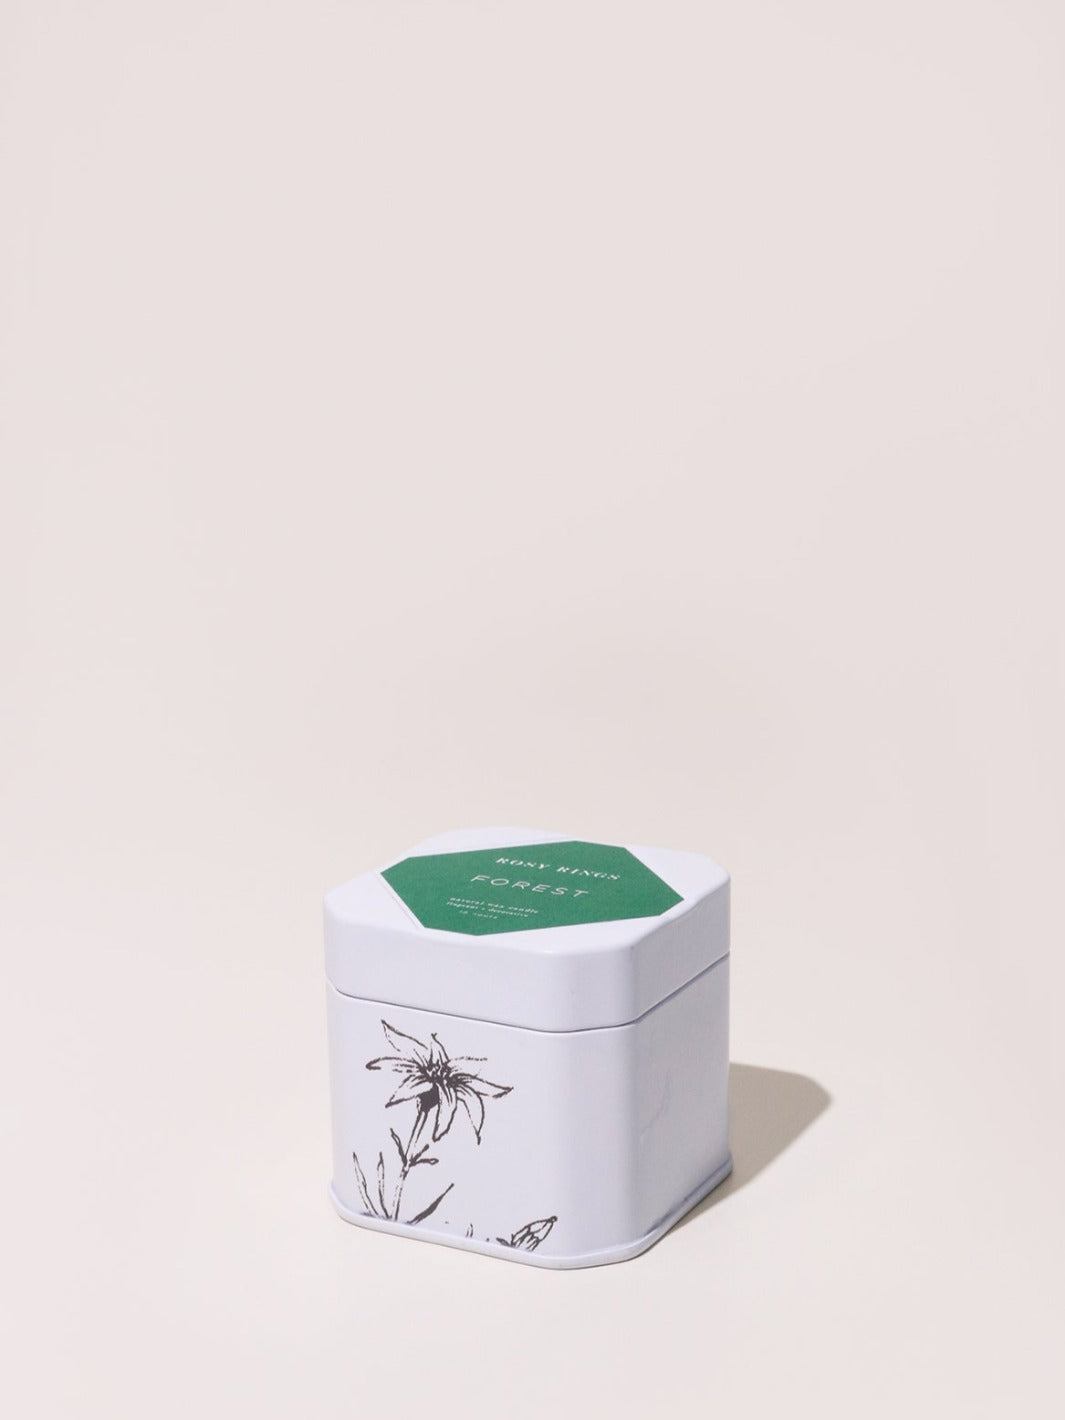 Forest Travel Tin Candle - White square candle with drawn flowers and green label